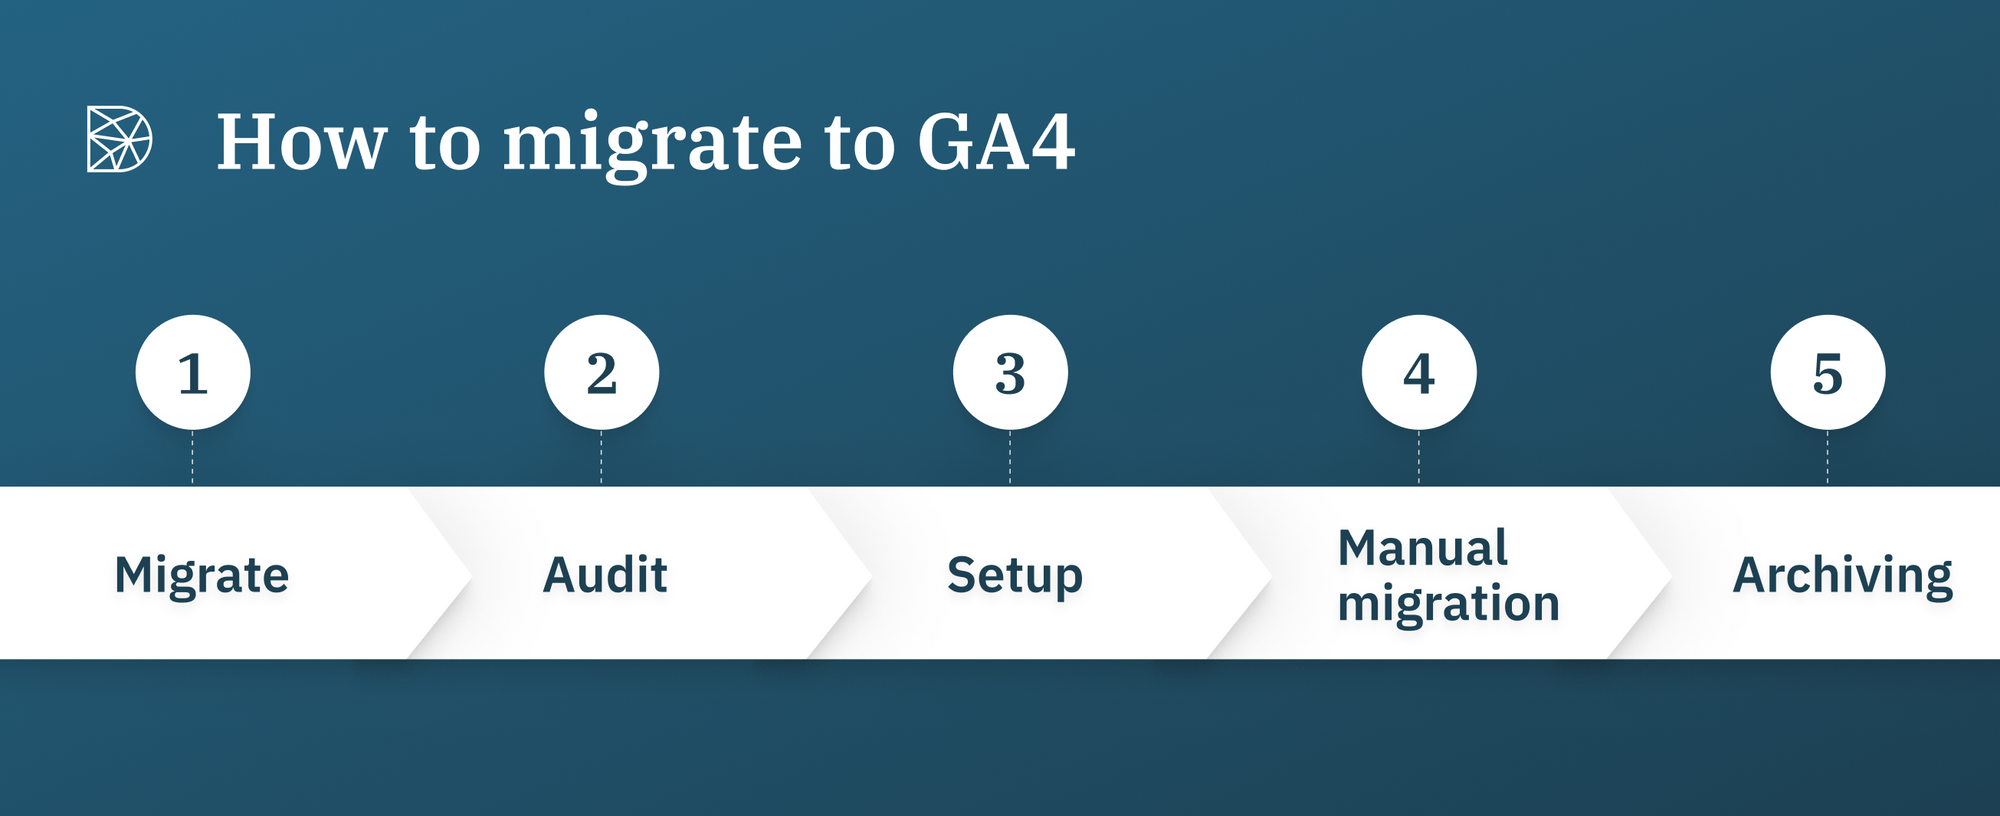 Didomi - How to migrate to GA4